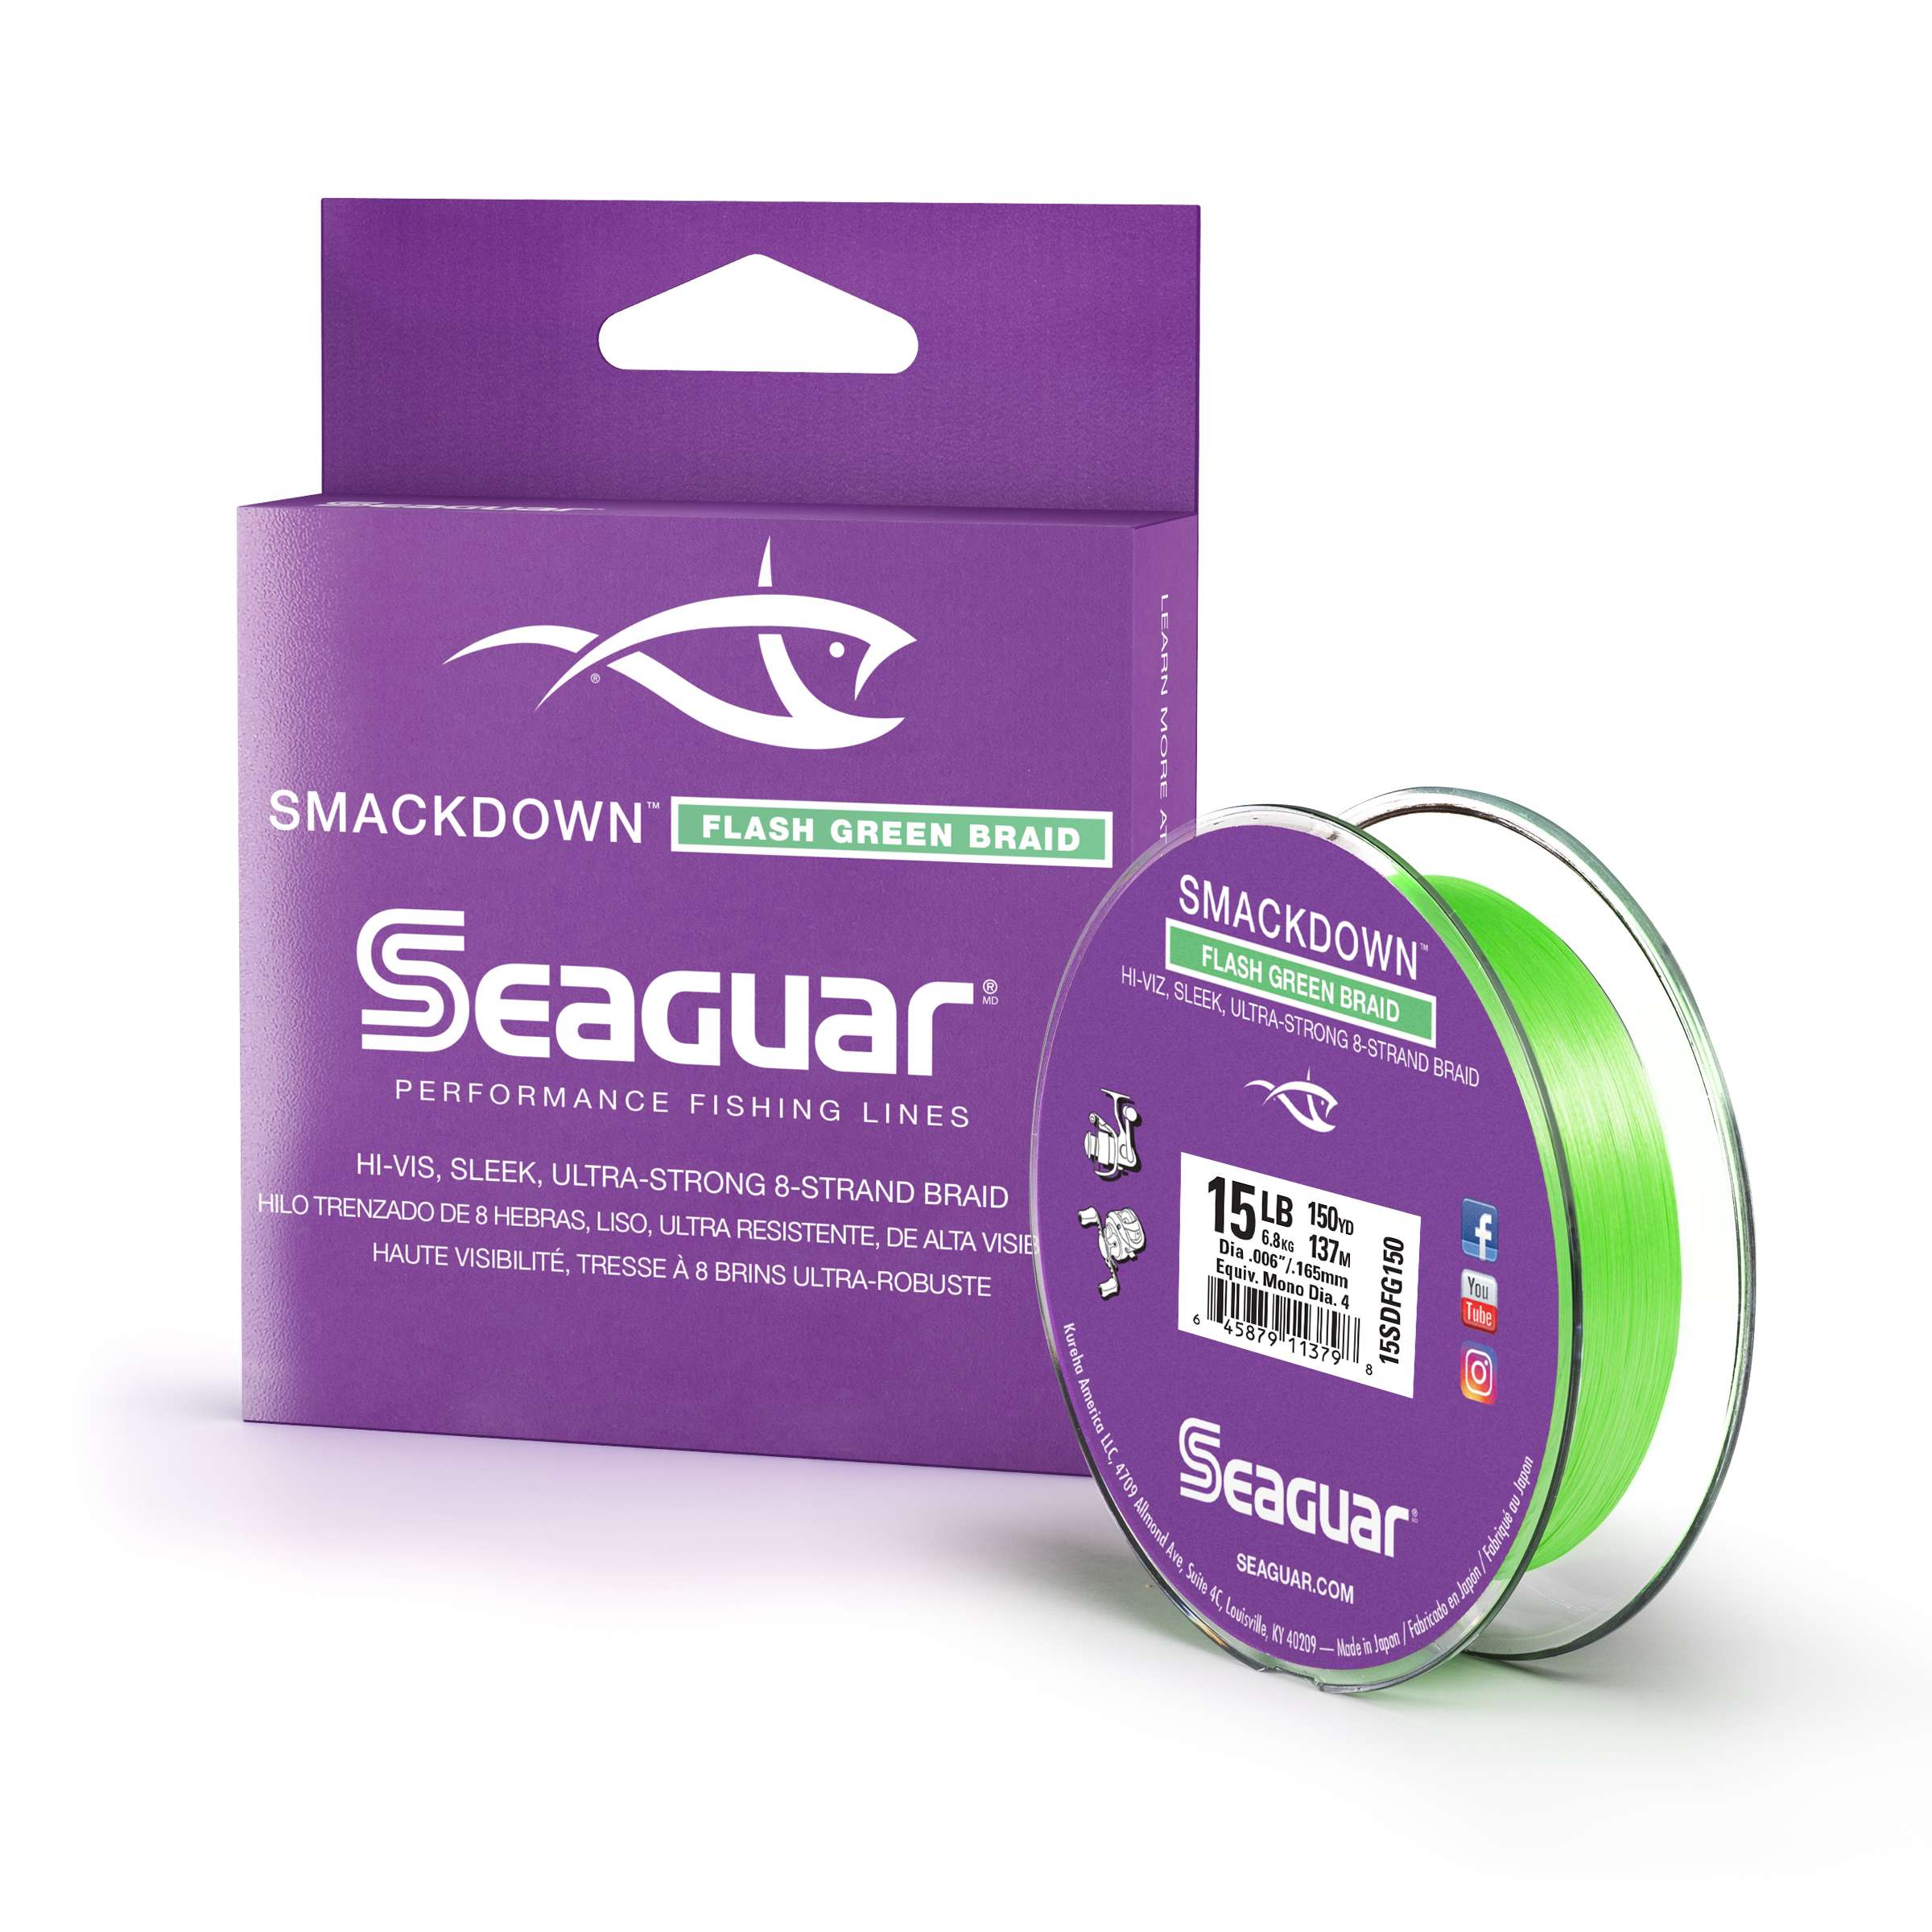 Smackdown Flash Green<BR>
Seagar<BR>
$29.99<BR>
Seaguar Smackdown is an eight-carrier braided line, manufactured with a high-density weave to give it an extremely round profile and an incredibly smooth finish. Youâll appreciate those differences every time you present a bait with Smackdown spooled on your reel, advantages that let you cover more water with every cast, so you can catch more fish each trip. Smackdownâs slick finish also makes it remarkably quiet through the rodâs line guides and eliminates wind knots. Smackdown is truly the ultimate braided line for bass anglers.
<BR>
Seaguar Smackdown â Flash Green assembles all of Smackdownâs key advantages and capabilities into a high-visibility braided line that is perfect for finesse applications and other times that strikes are detected not by feel, but by sight. Combine Smackdown â Flash Green with a Seaguar 100 percent fluorocarbon leader to enjoy the best of both worlds: slick, strong, and highly visible above the water; supple, abrasion-resistant, and nearly invisible below. 
<BR>
Seaguar Smackdown â Flash Green will be available in four popular tests, ranging from 10-pound test (2-pound mono diameter equivalent) to 30-pound test (8-pound mono equivalent) in 150-yard spools. Look for Smackdown â Flash Green on shelves in early 2019 with MSRP .  
